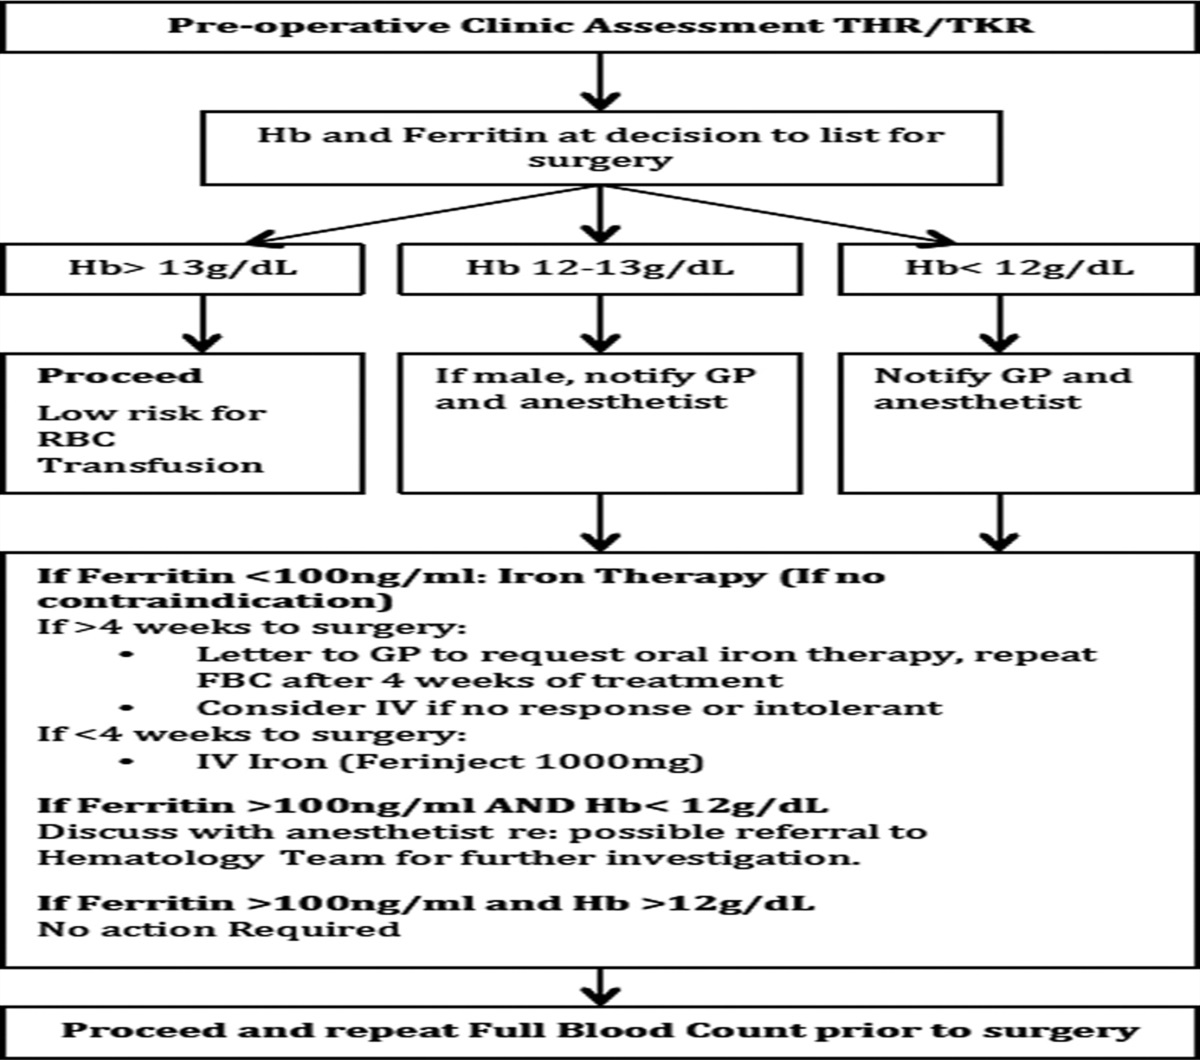 Optimization of Preoperative Anemia in Lower Limb Joint Replacement Surgery: Assessing the Rates of Allogenic Blood Transfusion and Duration of Hospital Stay